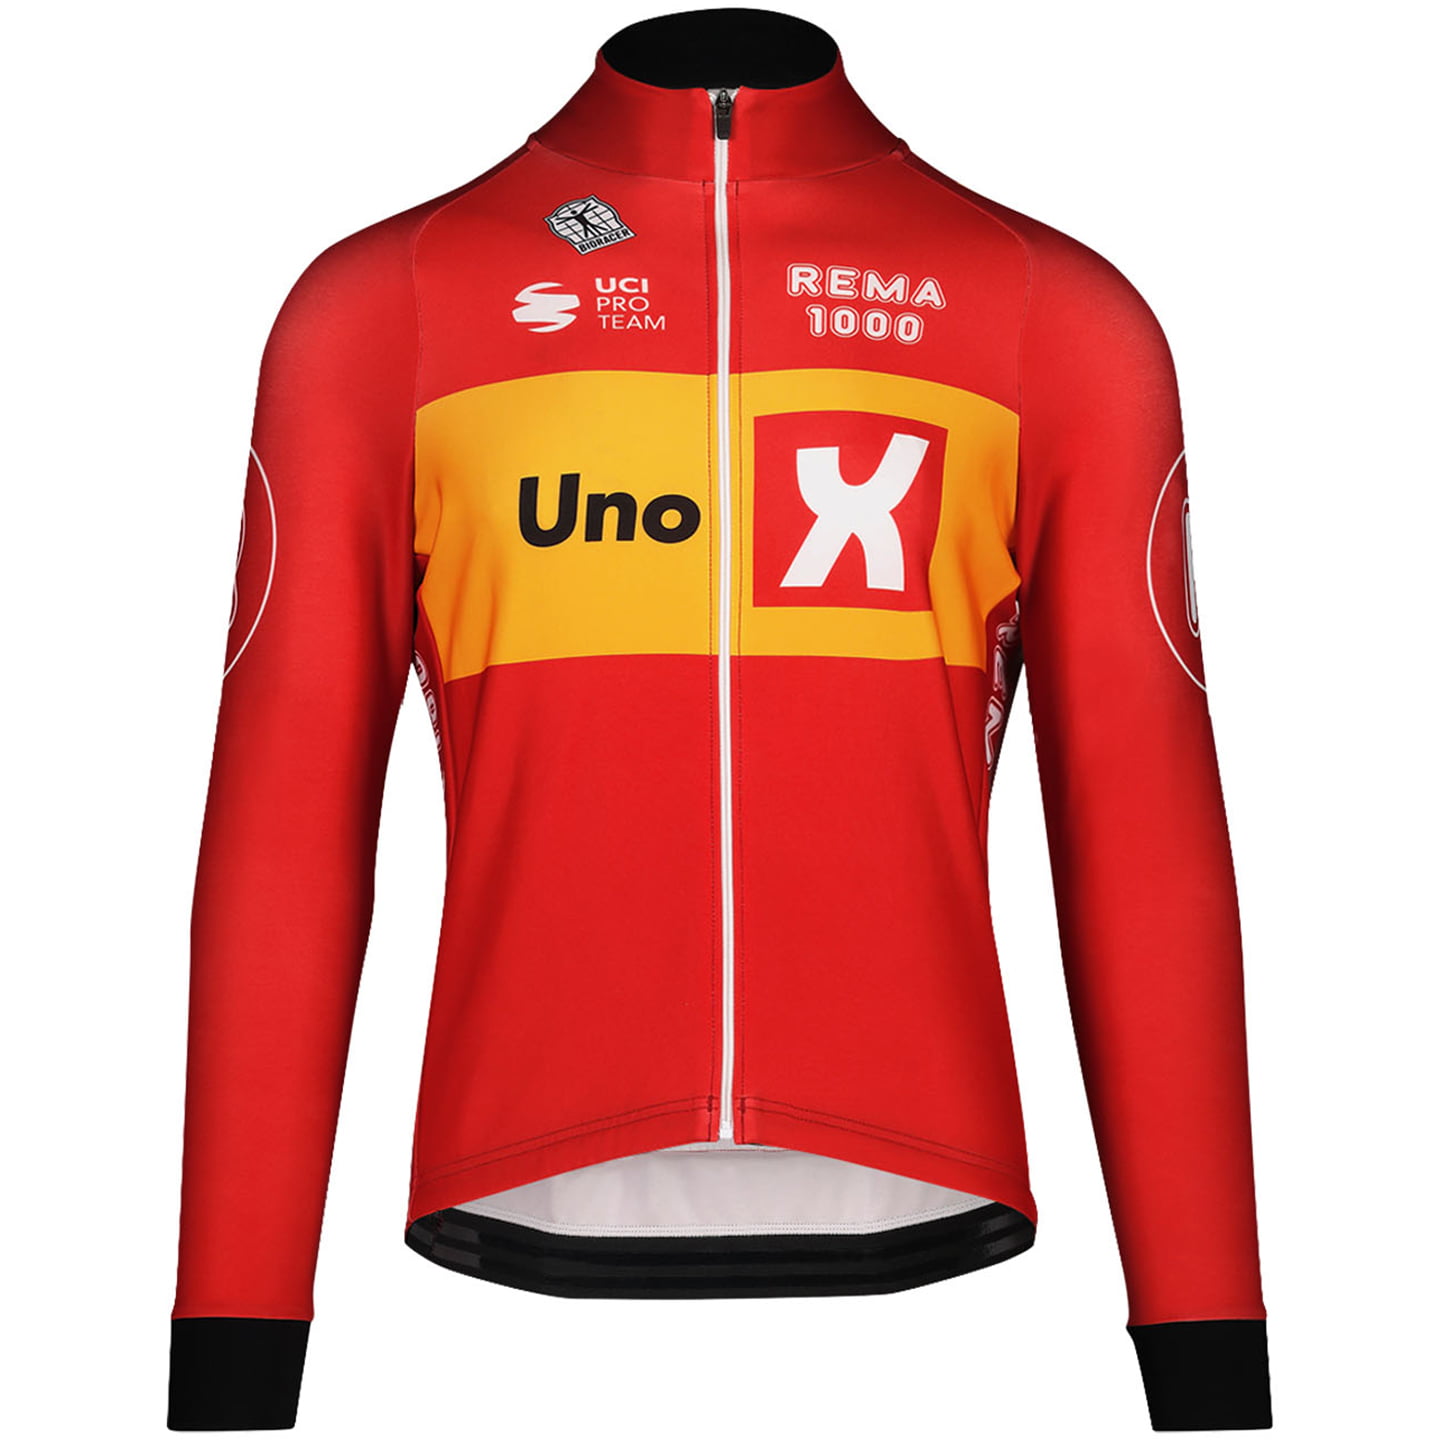 Uno-X Jersey Jacket Icon Tempest TdF 2023 Jersey / Jacket, for men, size L, Cycle jacket, Cycle gear